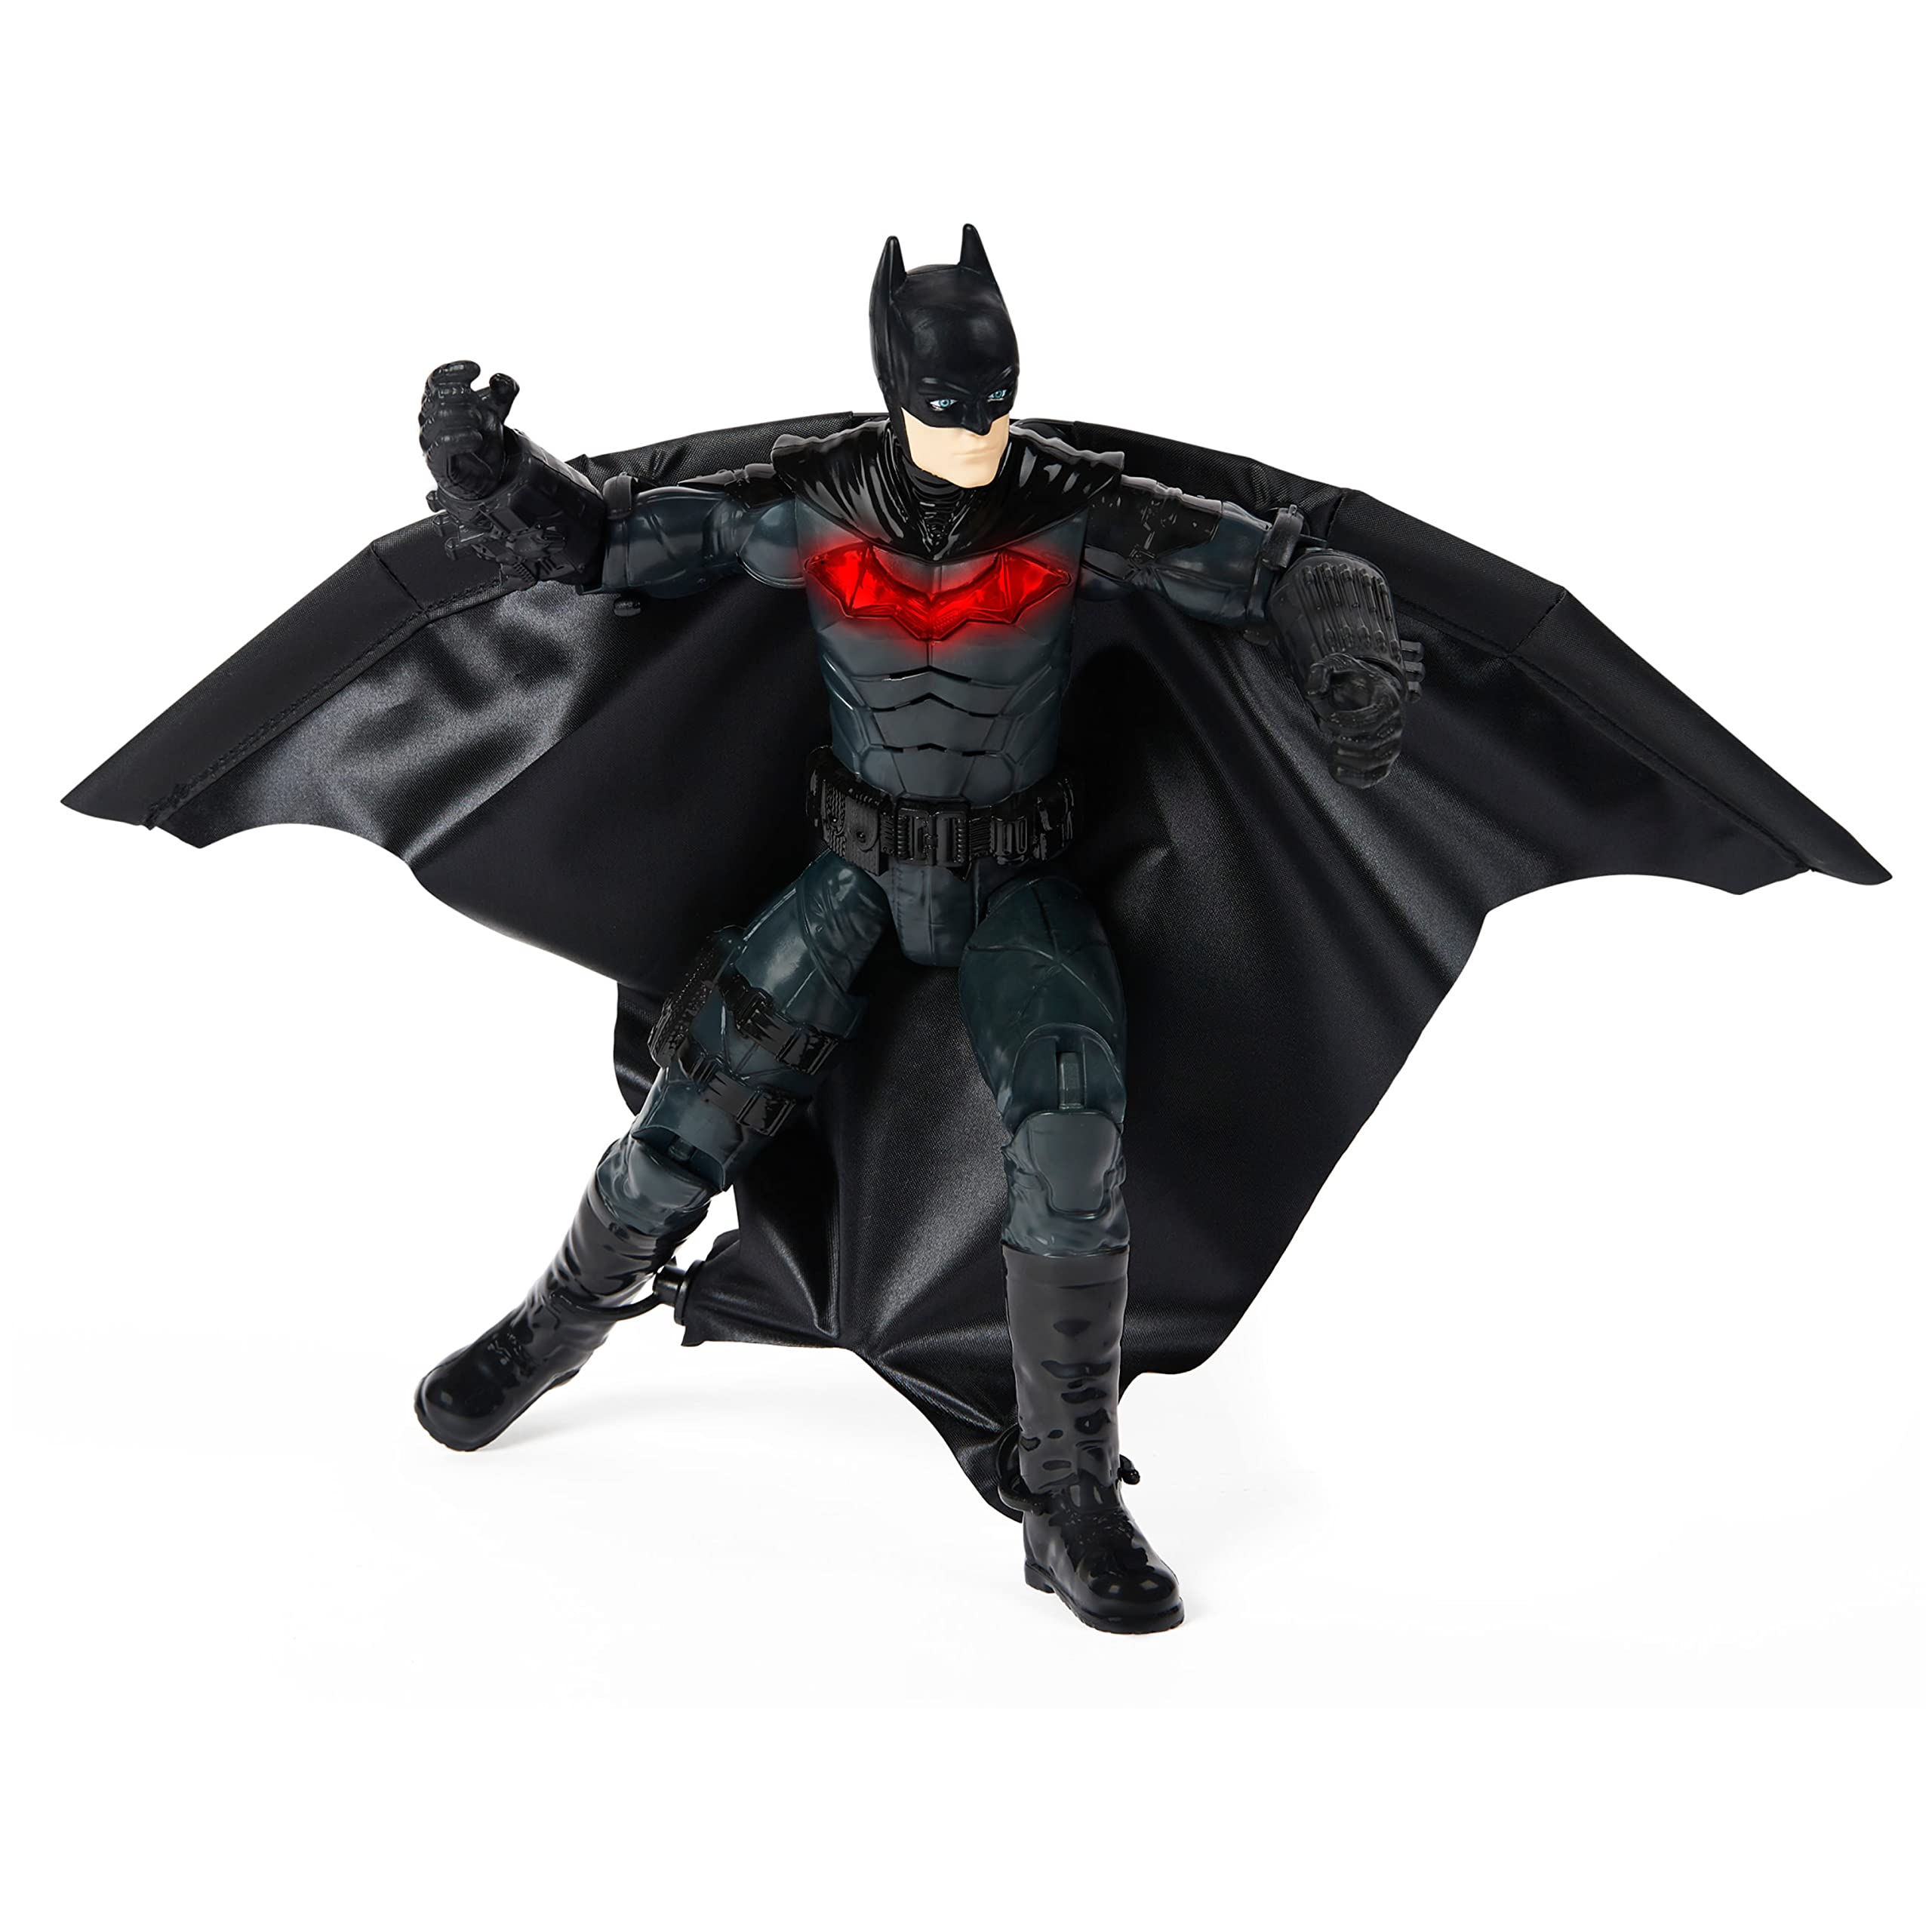 BATMAN DC Comics, 30cm Wingsuit Action Figure with Lights and Phrases, Expanding Wings, The Movie Collectible Kids Toys for Boys and Girls Ages 3 and up